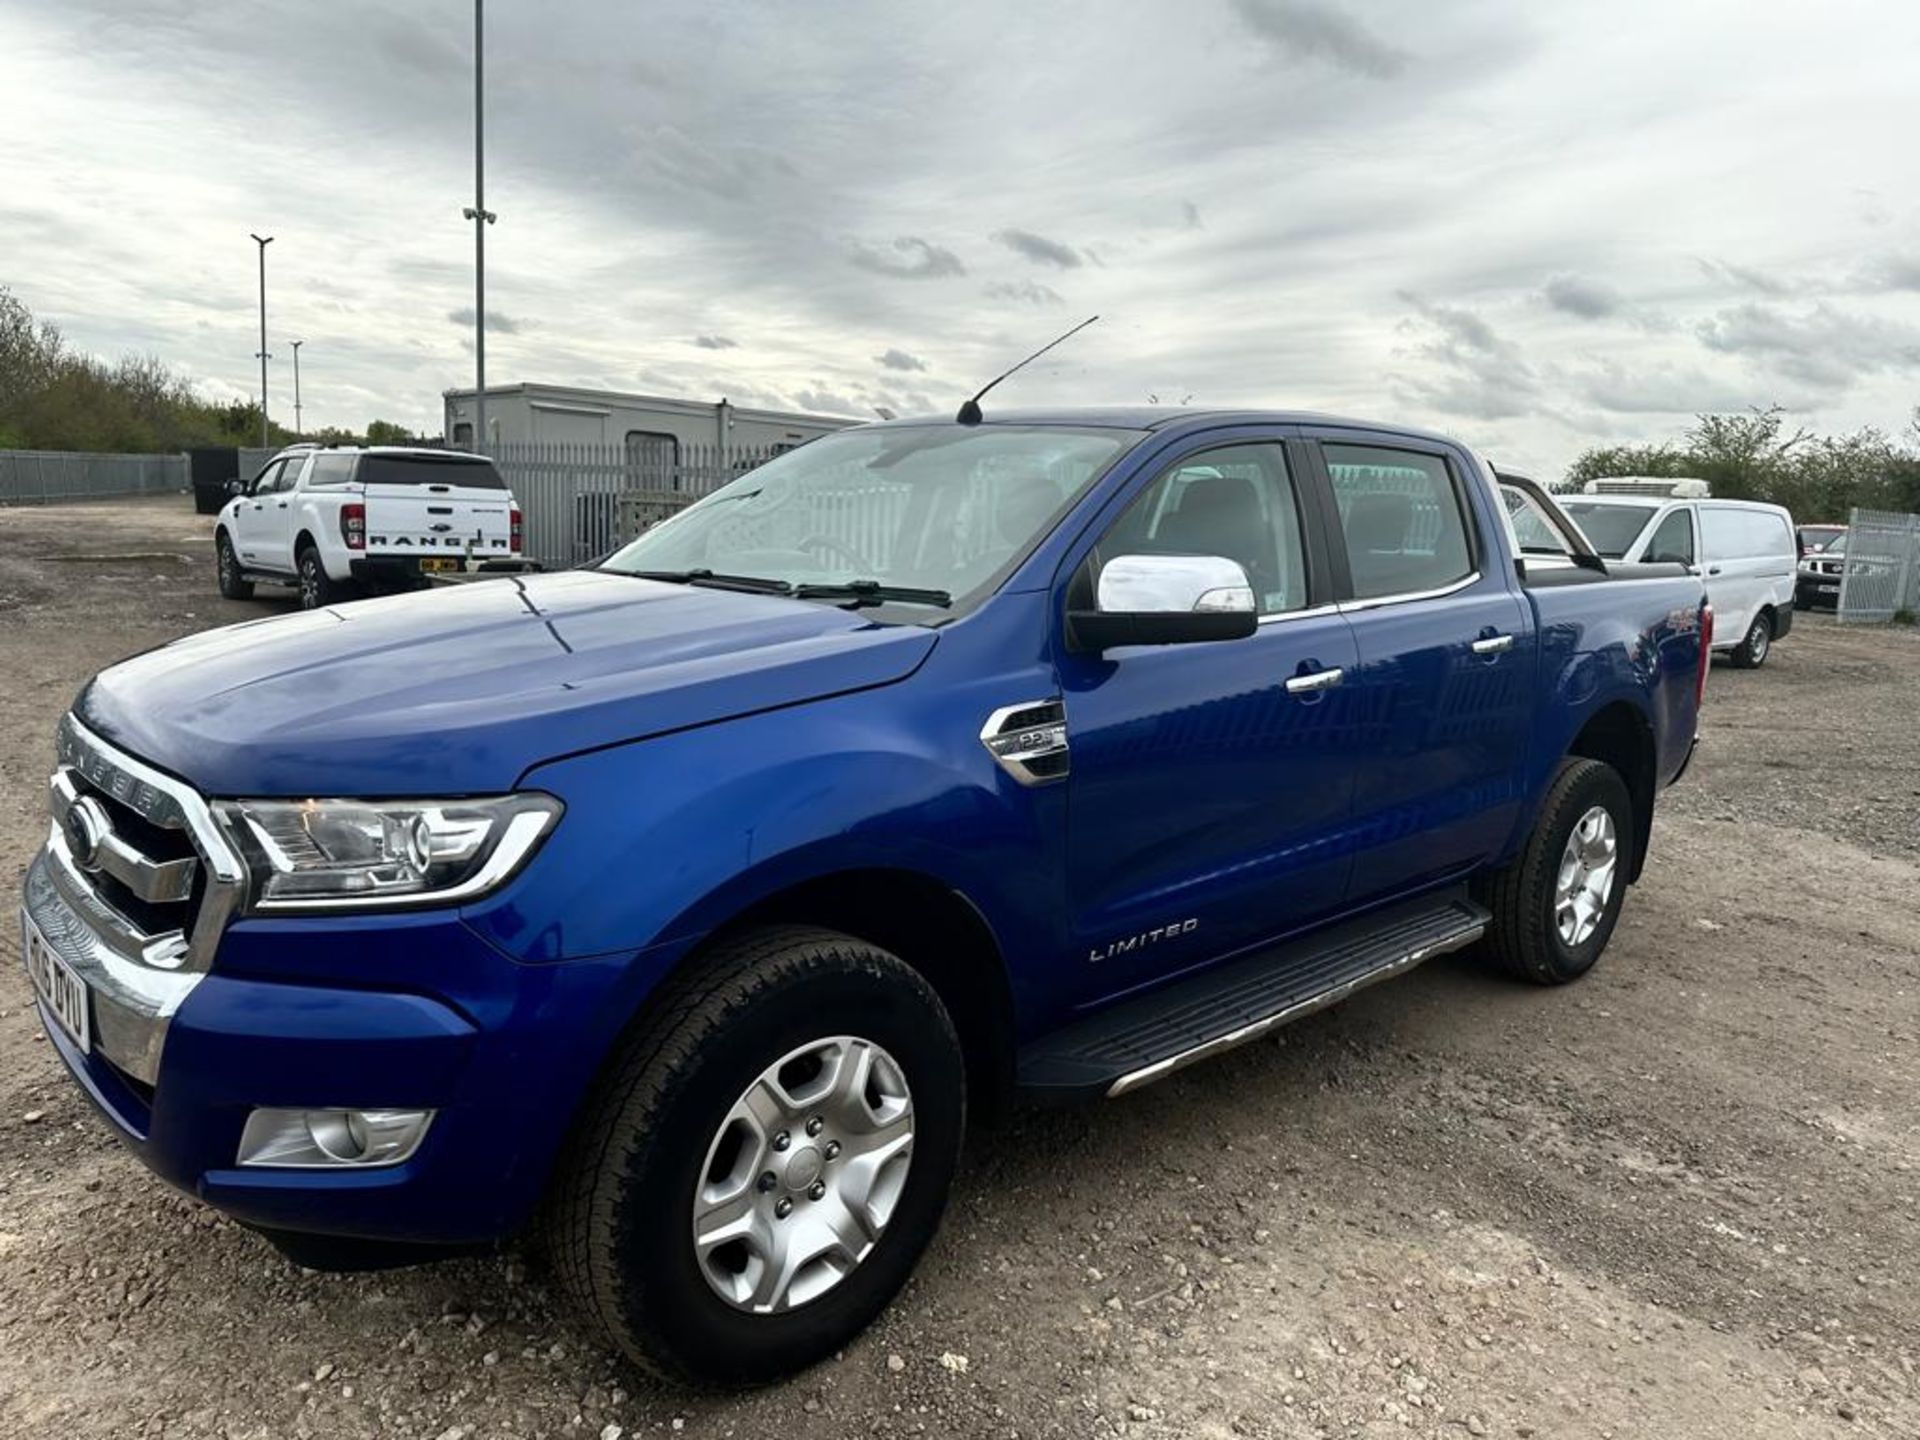 ** ON SALE ** Ford Ranger Limited DCI TDCI 160 4X4 2016 '16 Reg'-Automatic - A/C - -Bluetooth-No Vat - Image 5 of 38